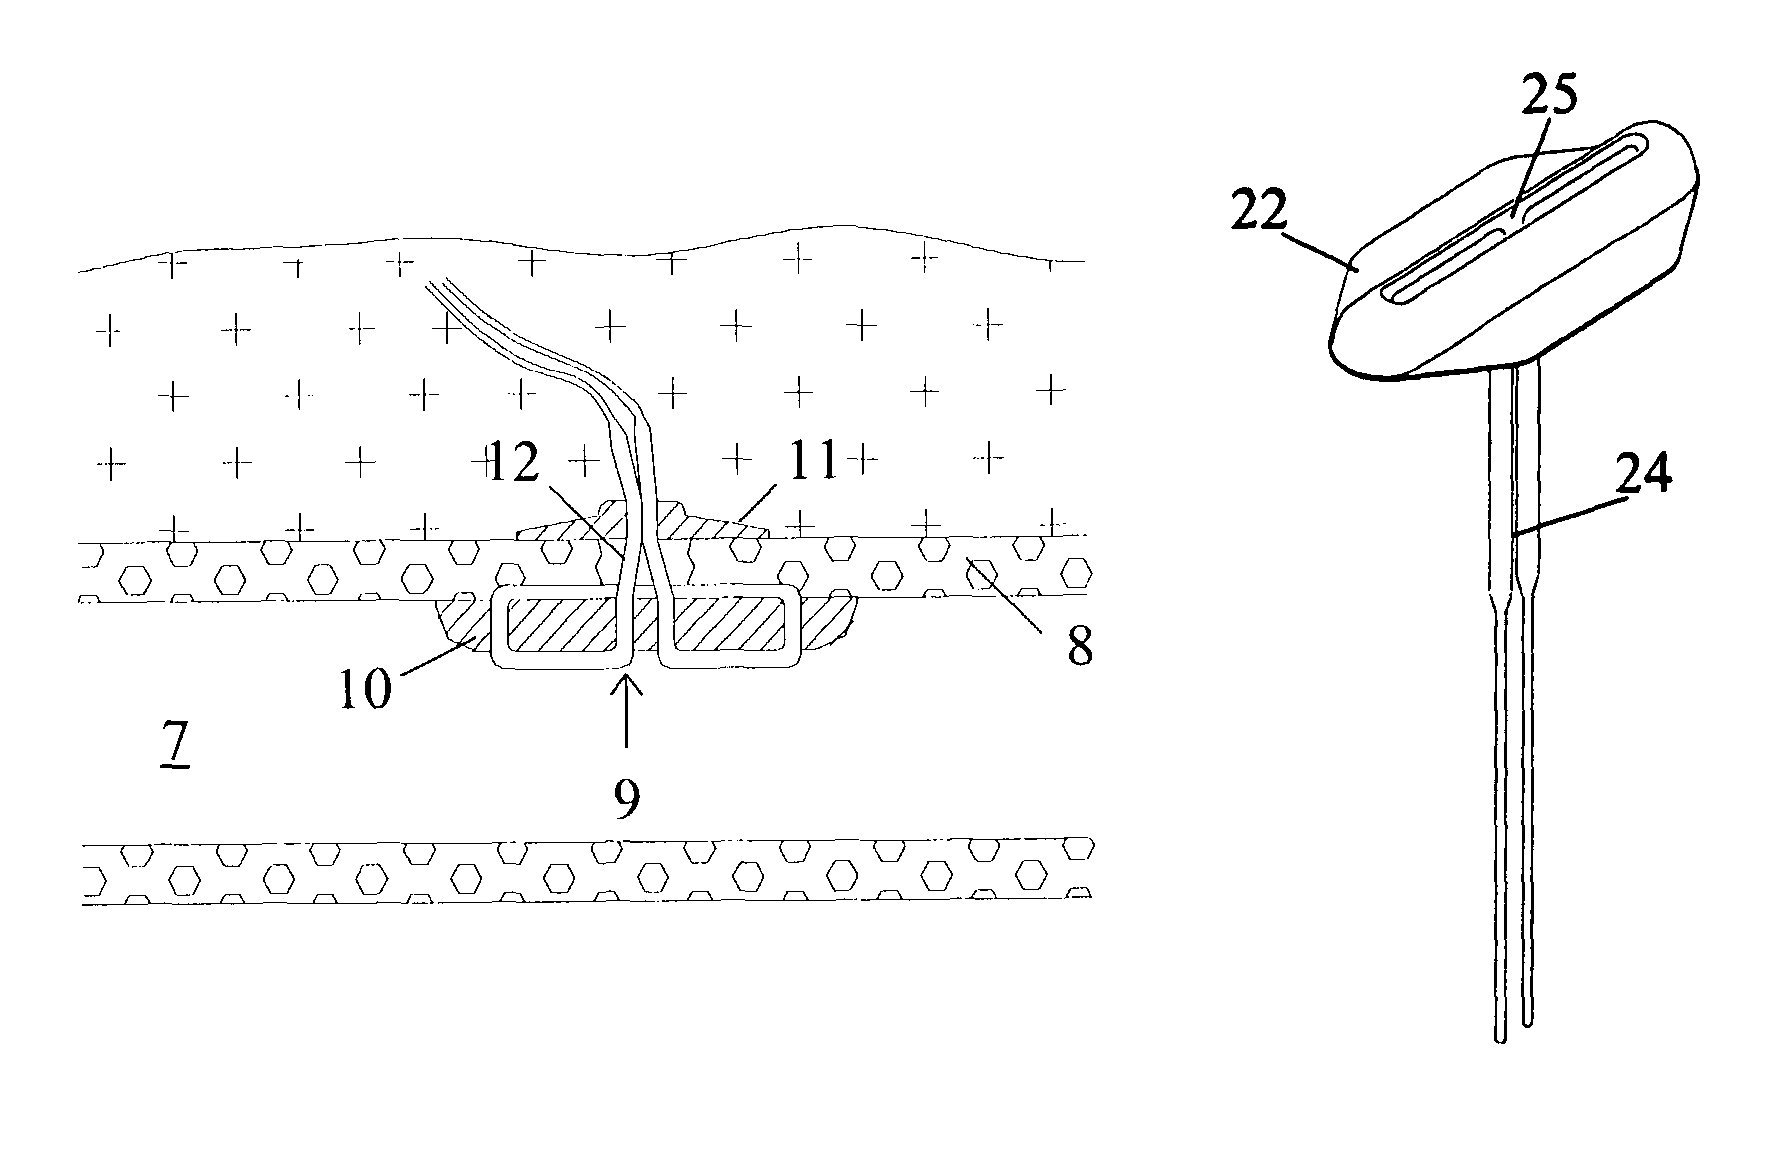 Absorbable medical sealing device with retaining assembly having at least two loops